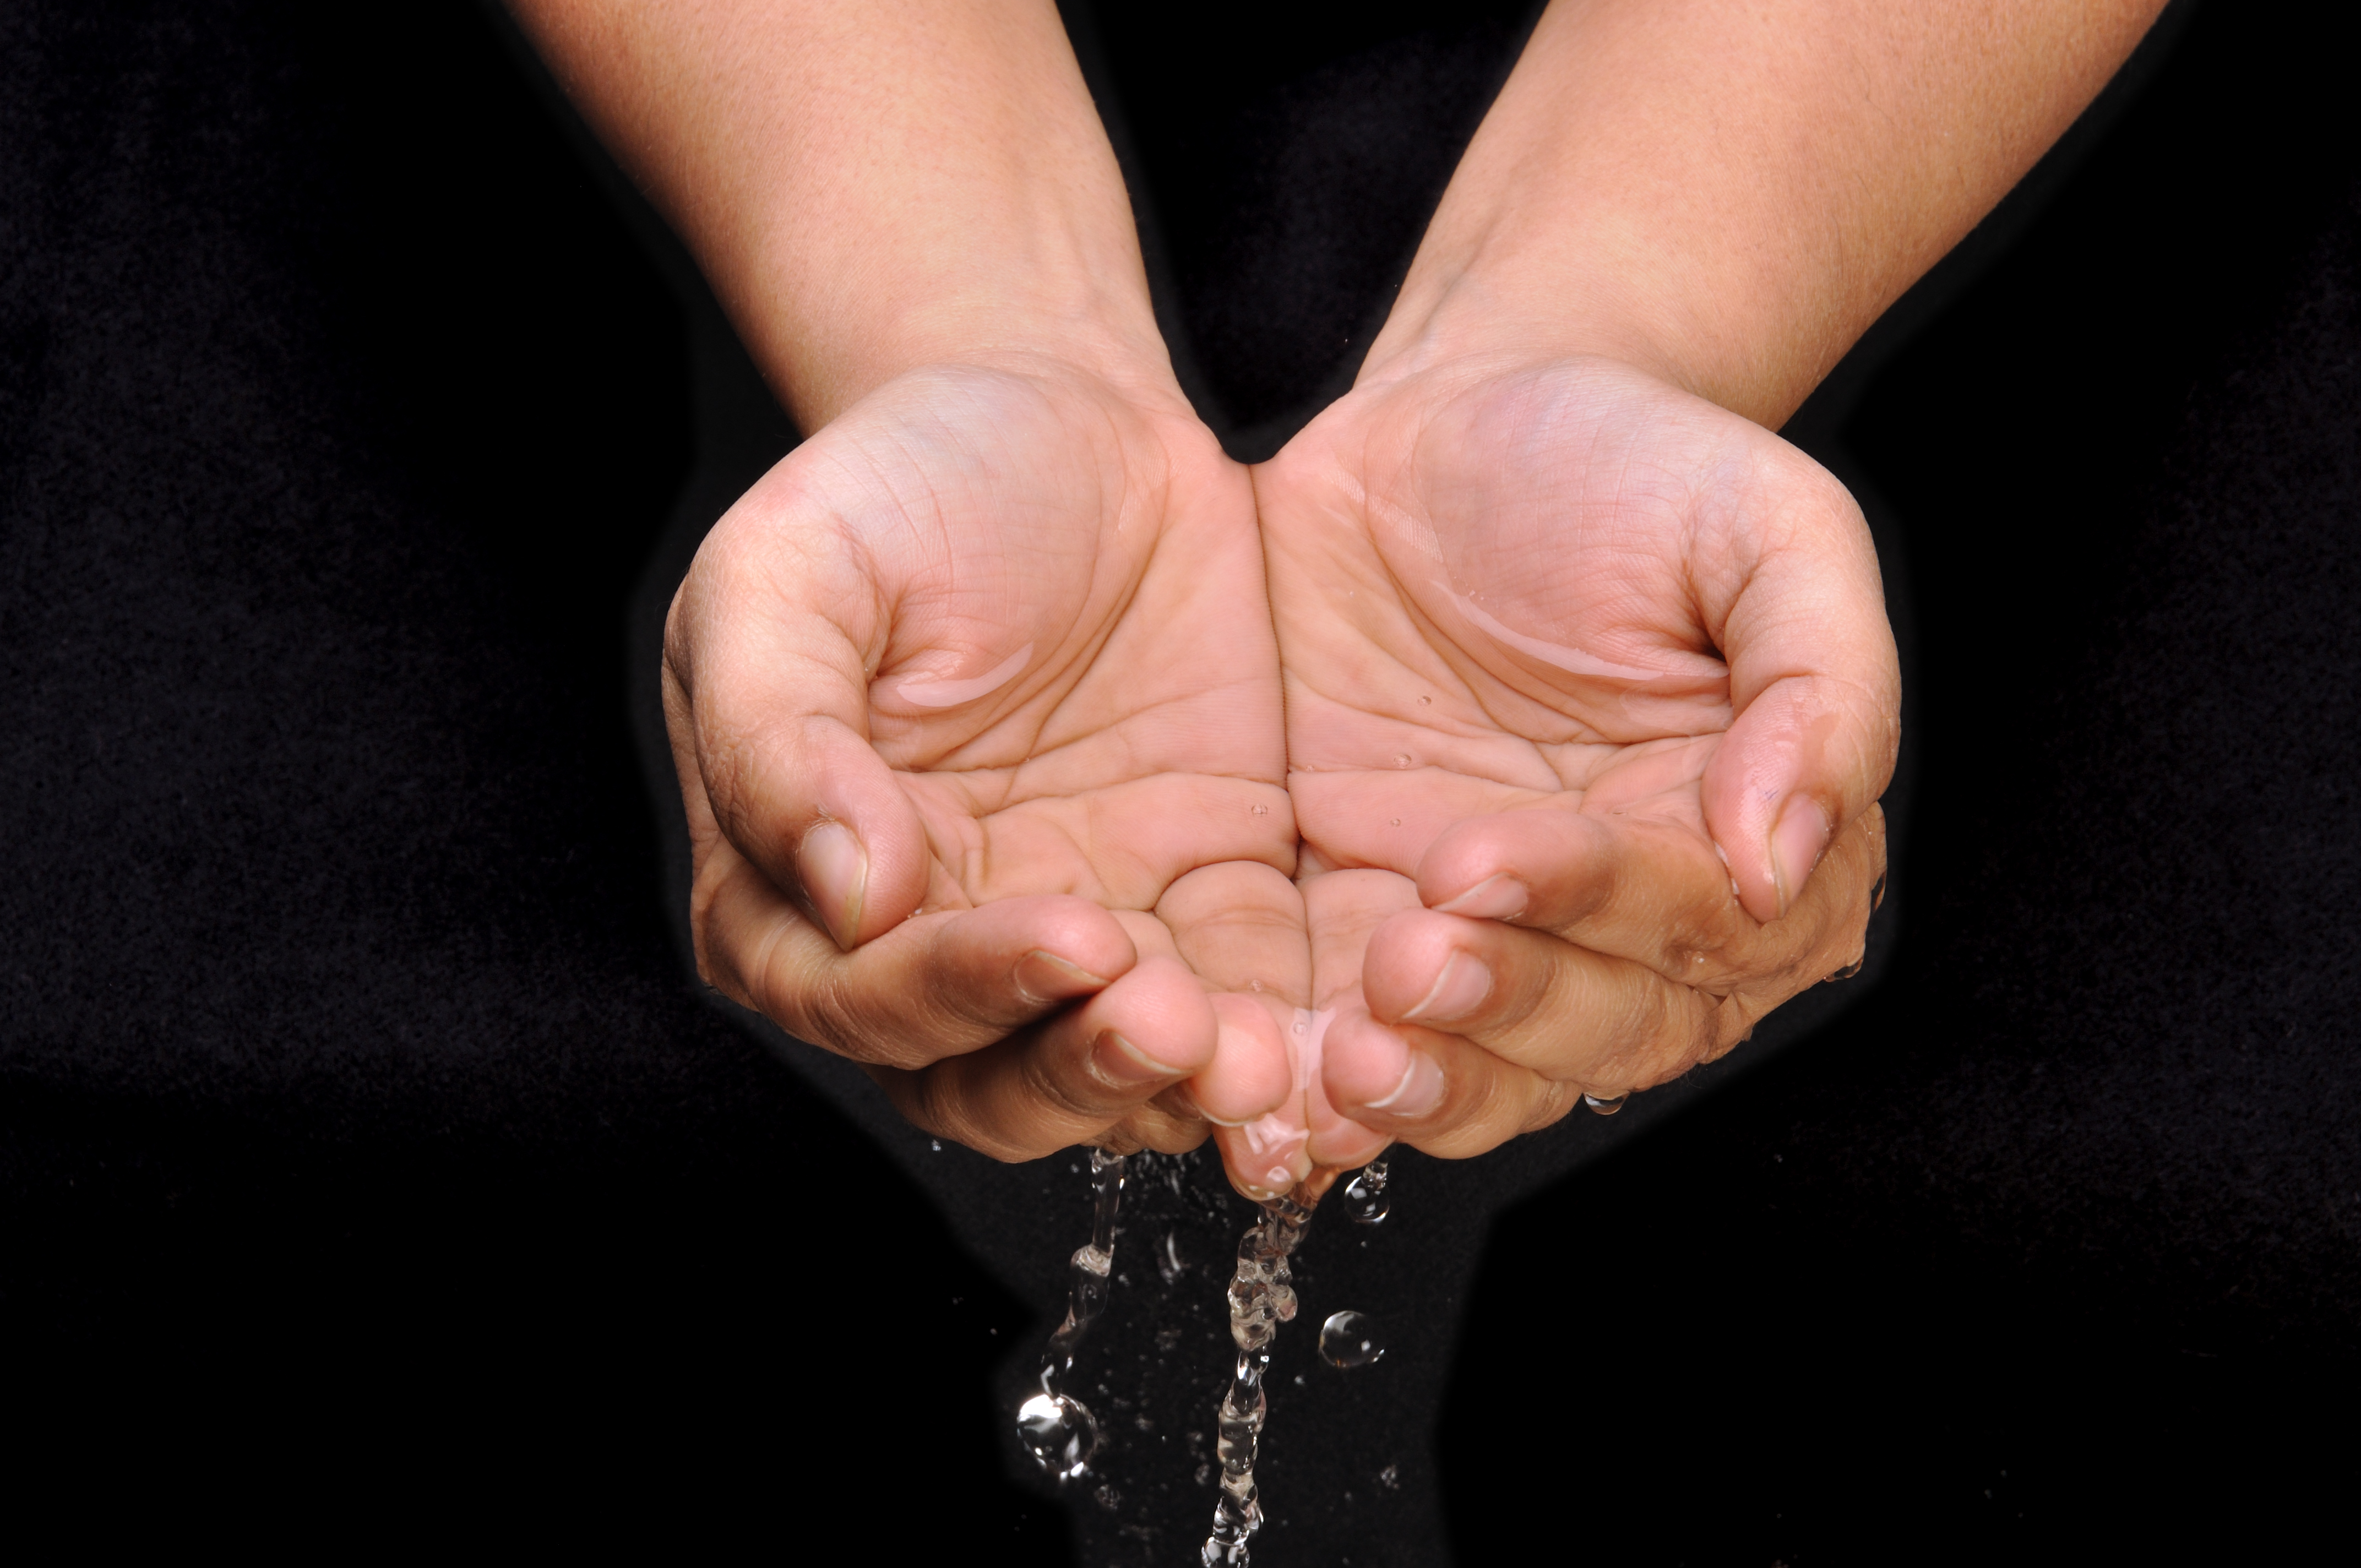 Cupped hands. Hand holding Water. Handful. Prayer hands. Water person hand.